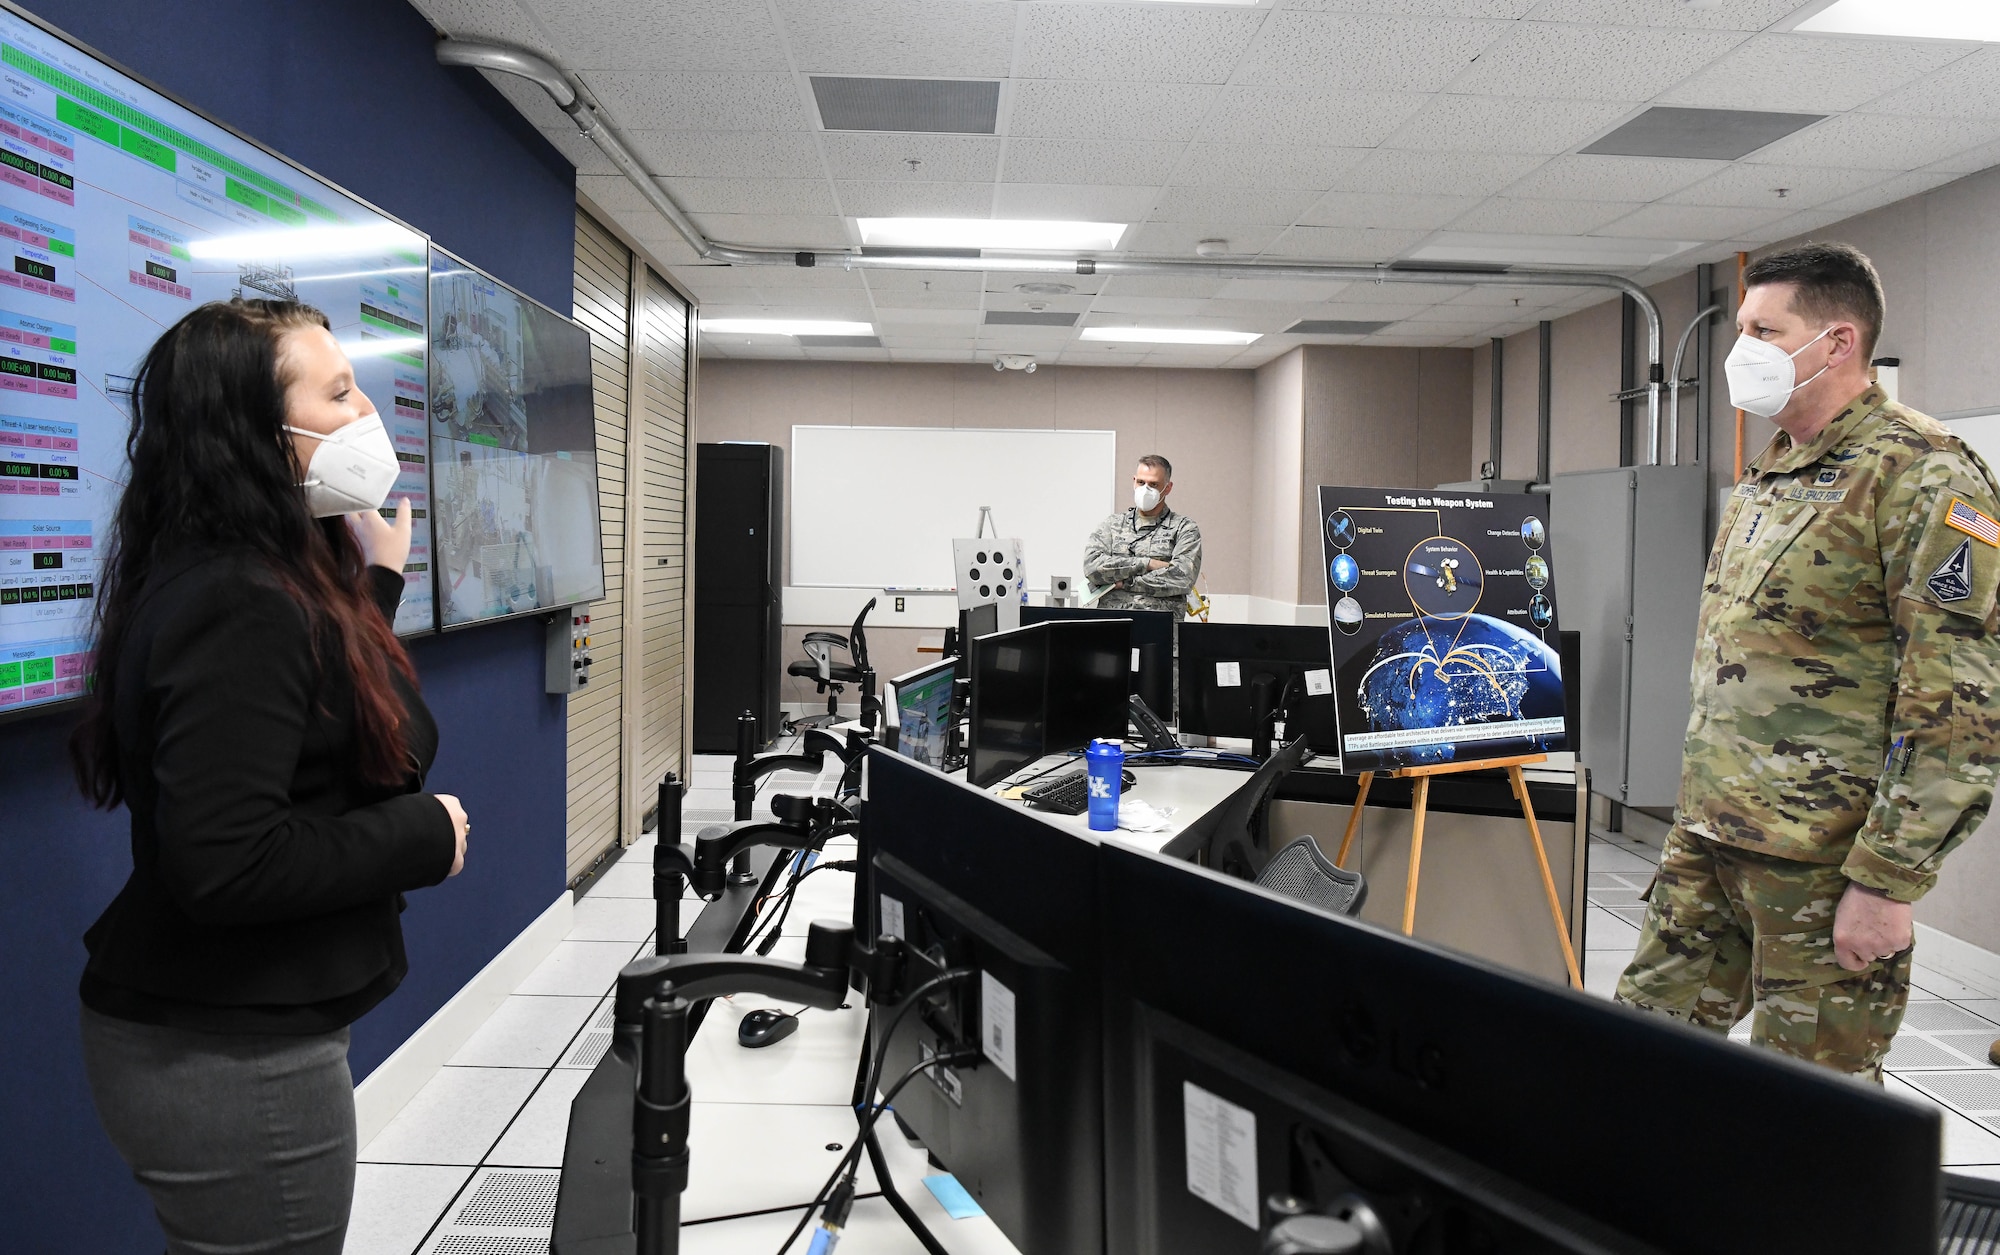 Kellye Burns, space test engineer, left, speaks about the Arnold Engineering Development Complex Space Asset Resilience capability to Gen. David Thompson, vice chief of space operations, U.S. Space Force, during a tour of the Space Threat Assessment Testbed control room at Arnold Air Force Base, Tenn., headquarters of AEDC, Feb. 5, 2021. (U.S. Air Force photo by Jill Pickett)